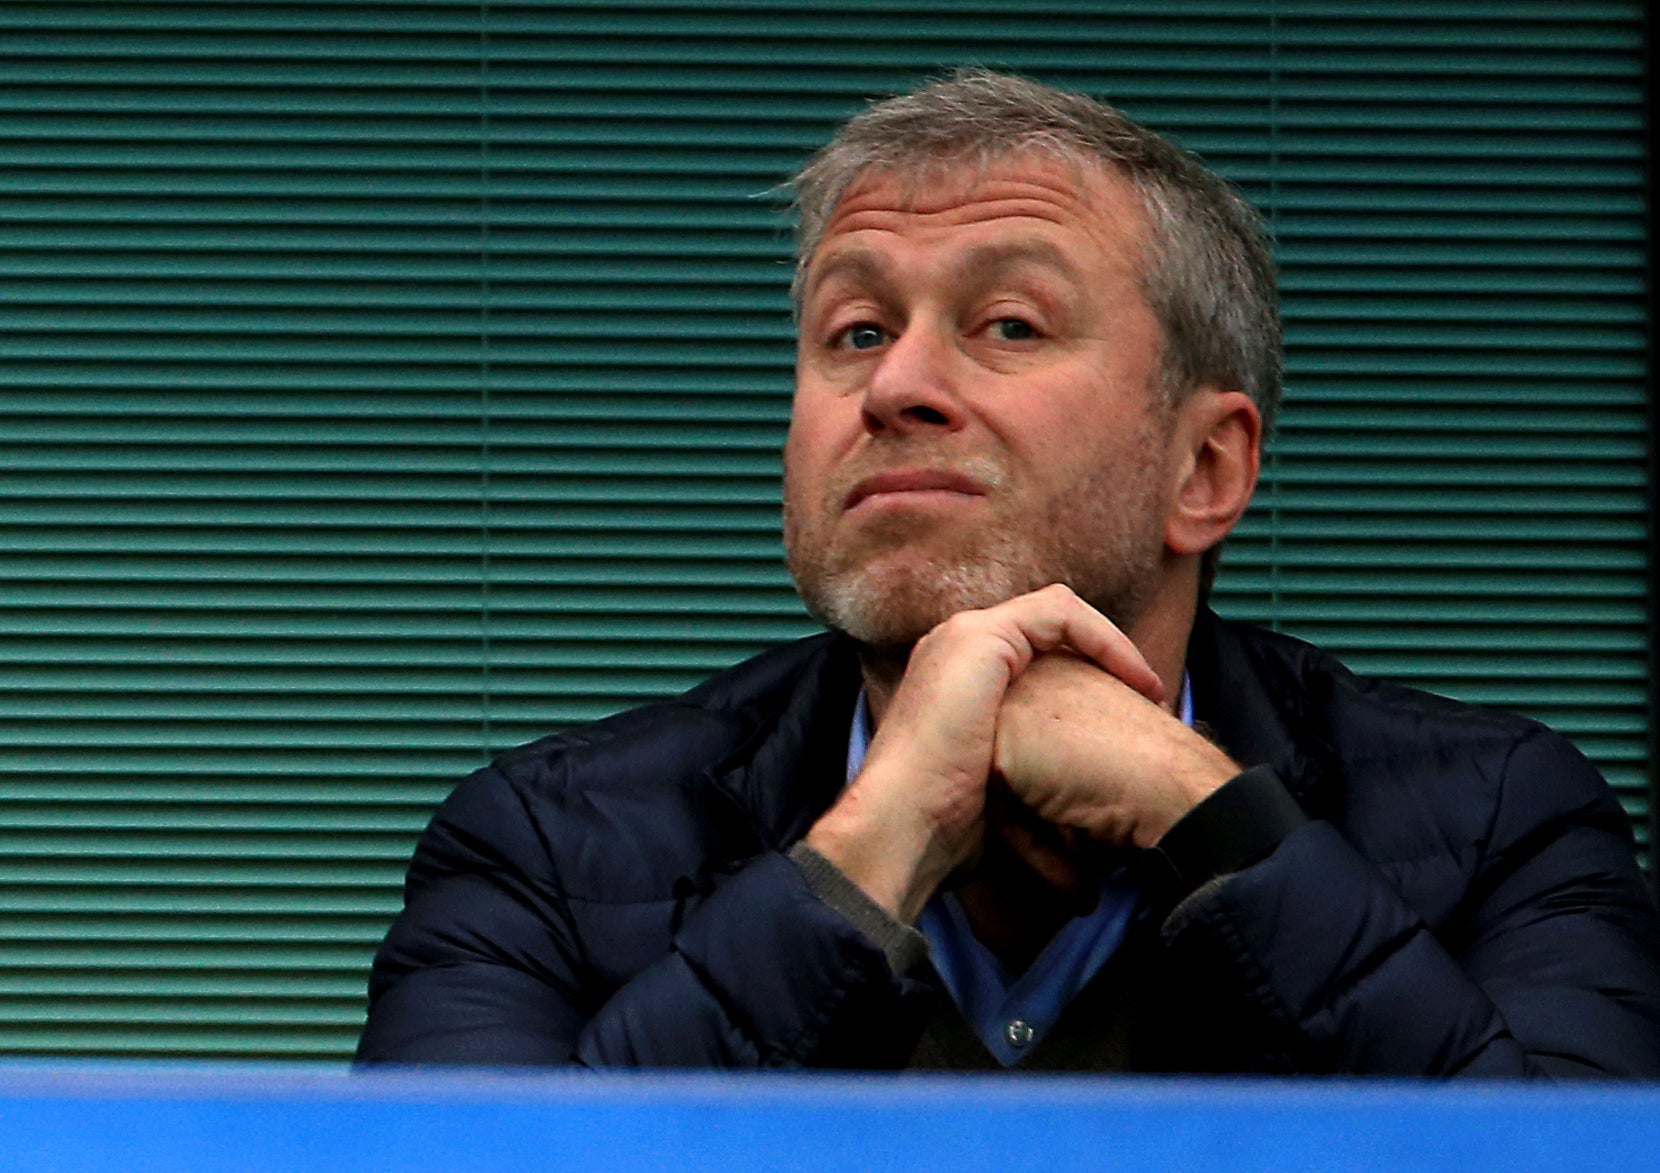 Roman Abramovich, pictured, will sell Chelsea after 19 years as owner (Adam Davy/PA)